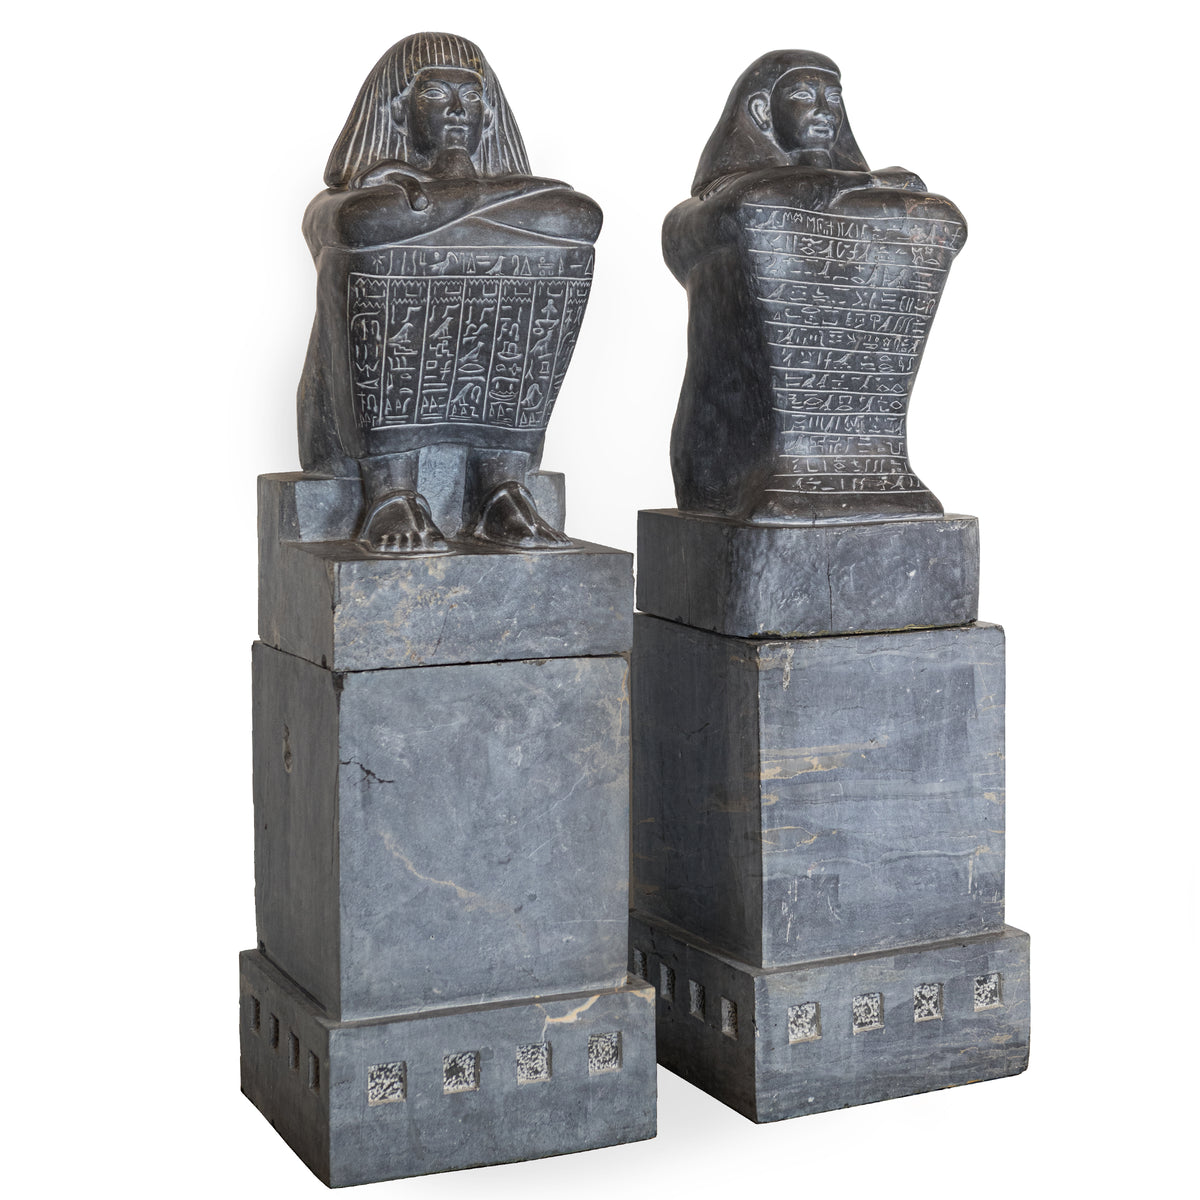 Pair of Monumental Egyptian Marble Block Statues with Plinths | The Architectural Forum